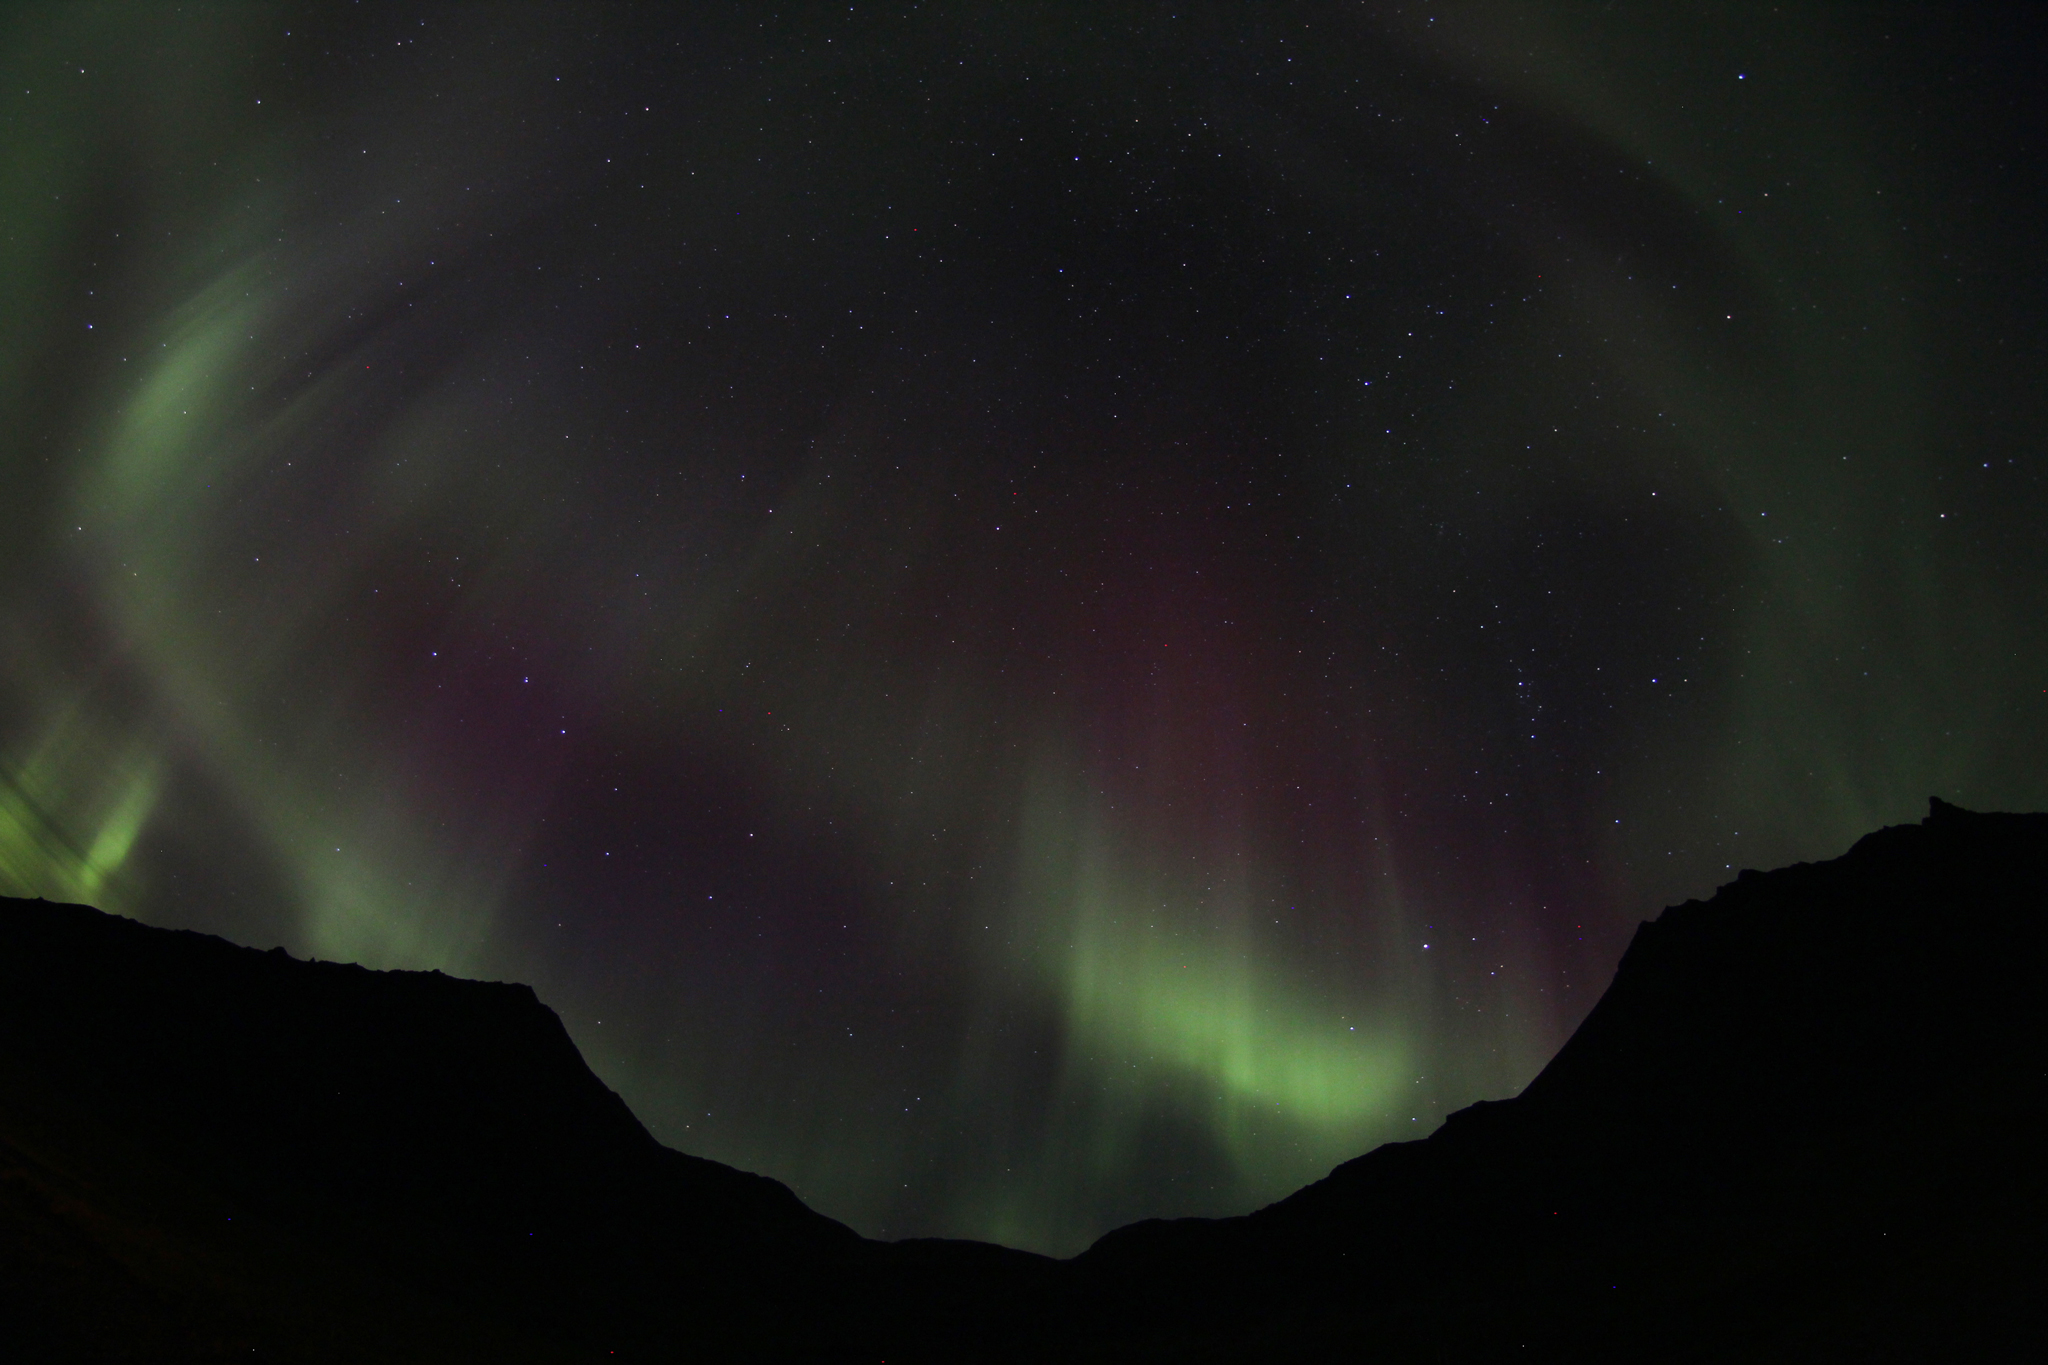 How To Photograph The Northern Lights